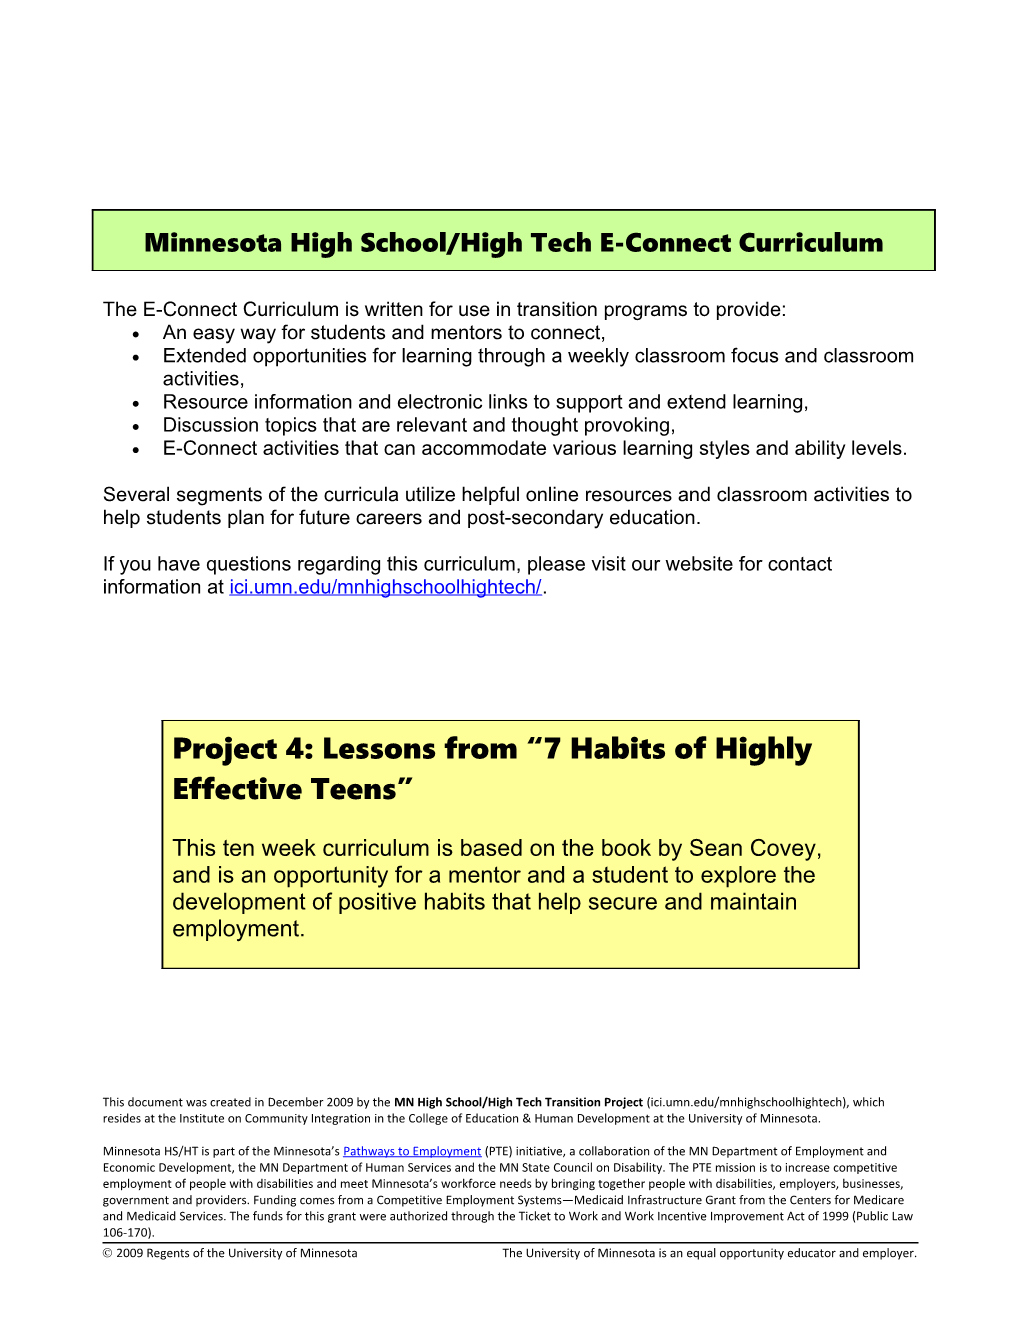 The E-Connect Curriculum Is Written for Use in Transition Programs to Provide